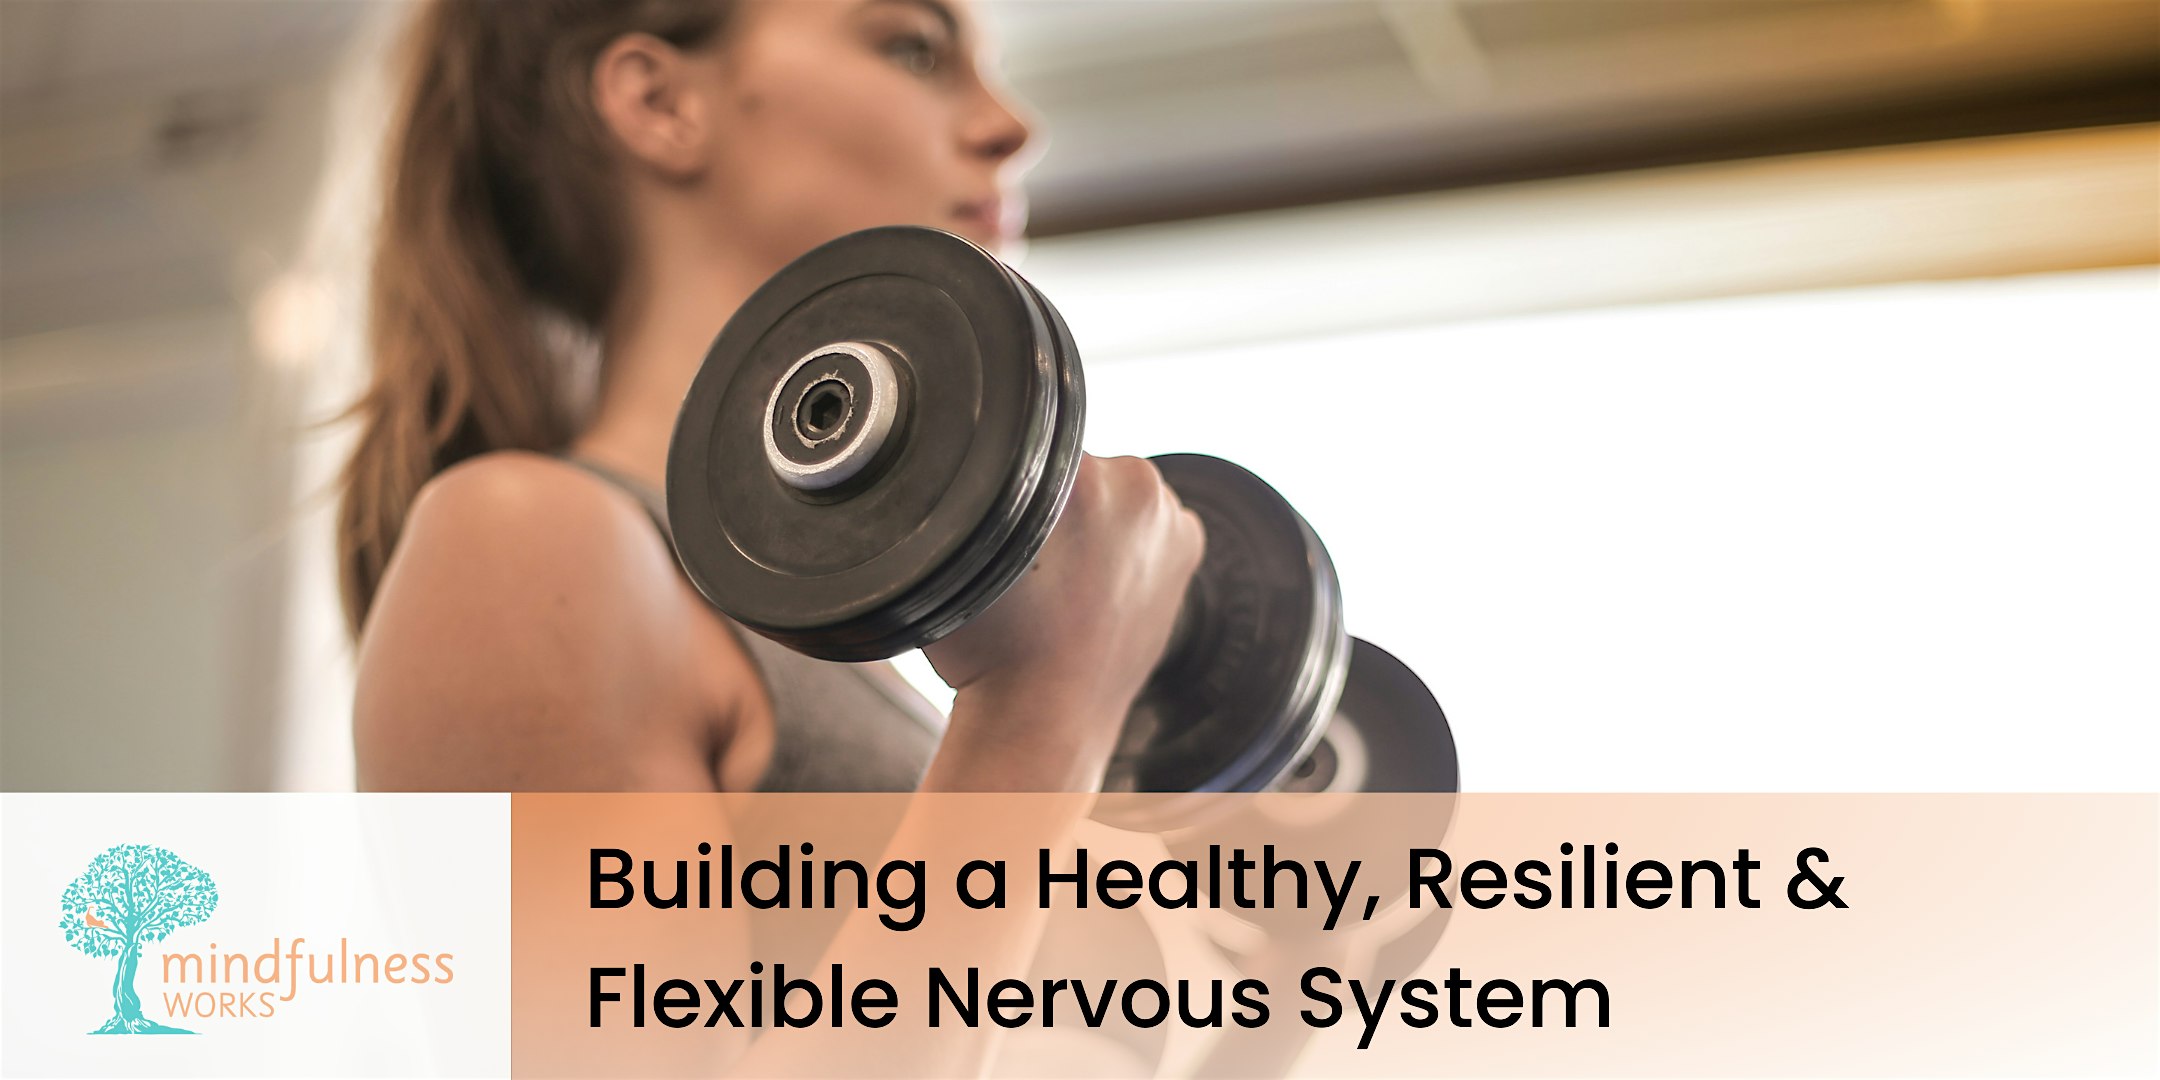 Building a Healthy, Flexible & Resilient Nervous System | Mindfulness Plus